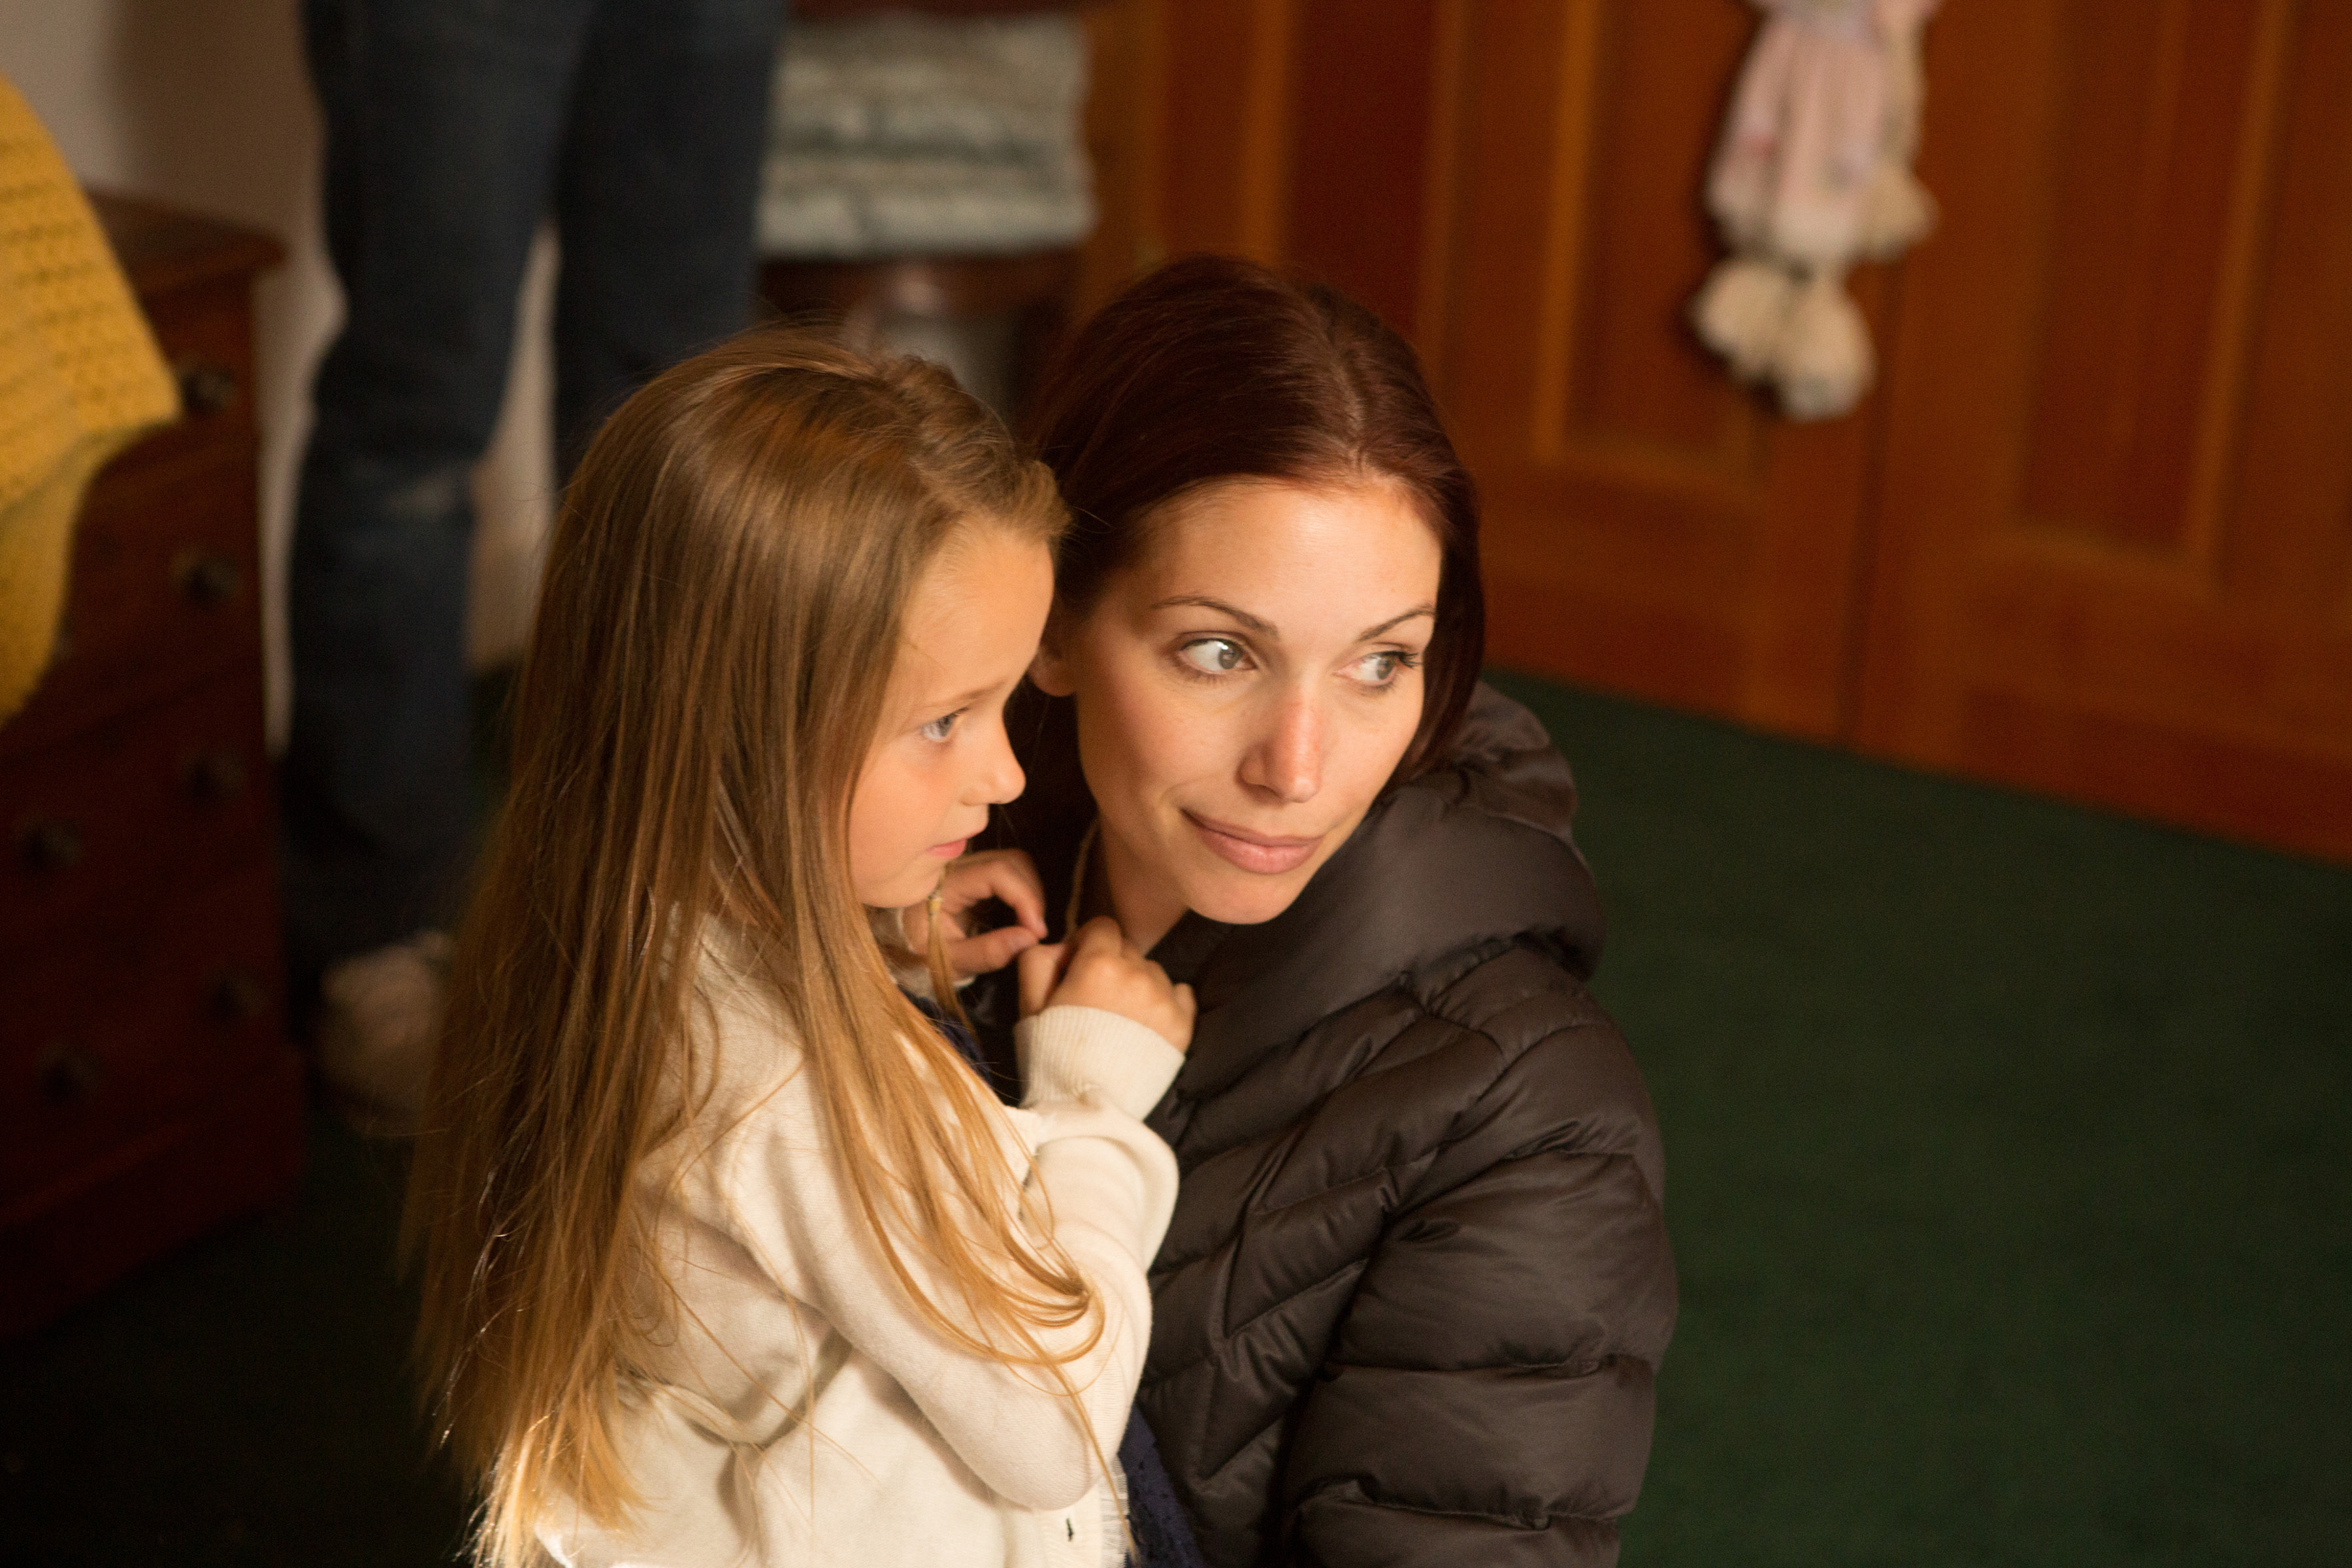 Producer/Actress Autumn Federici behind the scenes with actress Vivienne Bollinger